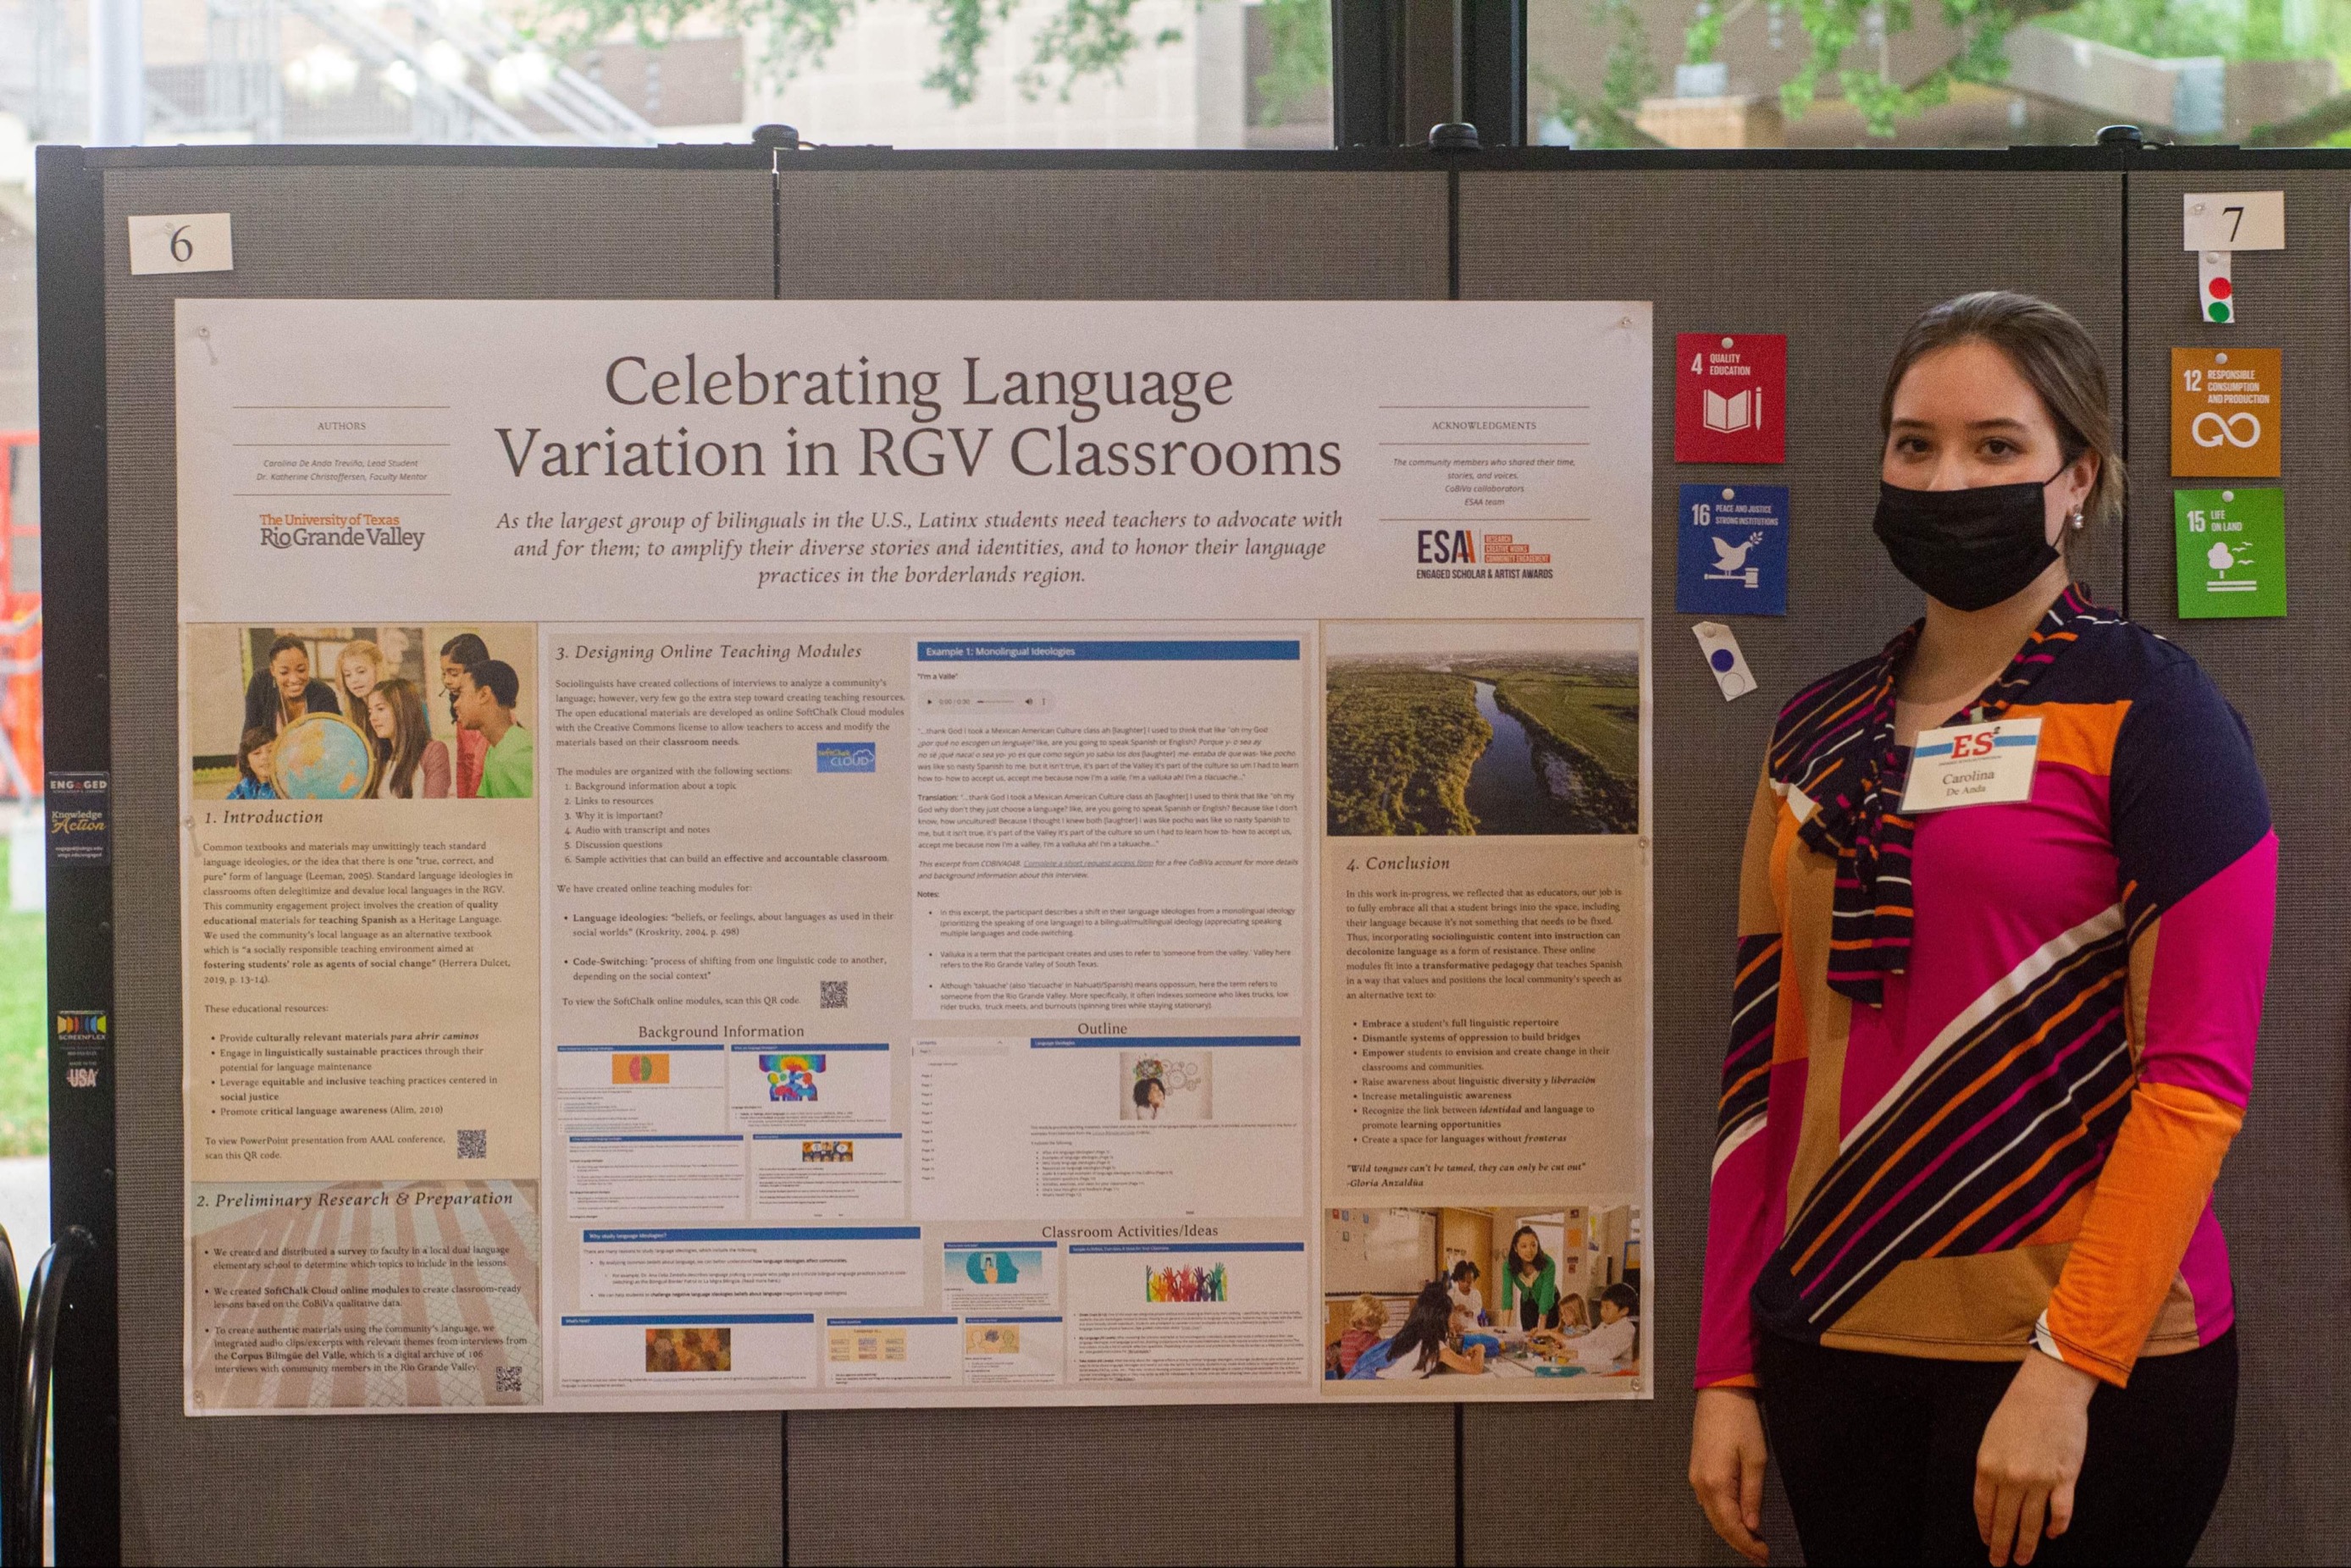 Carolina DeAnda earns Distinguished Scholar Award for Poster at Engaged Scholar Symposium post content graphic.